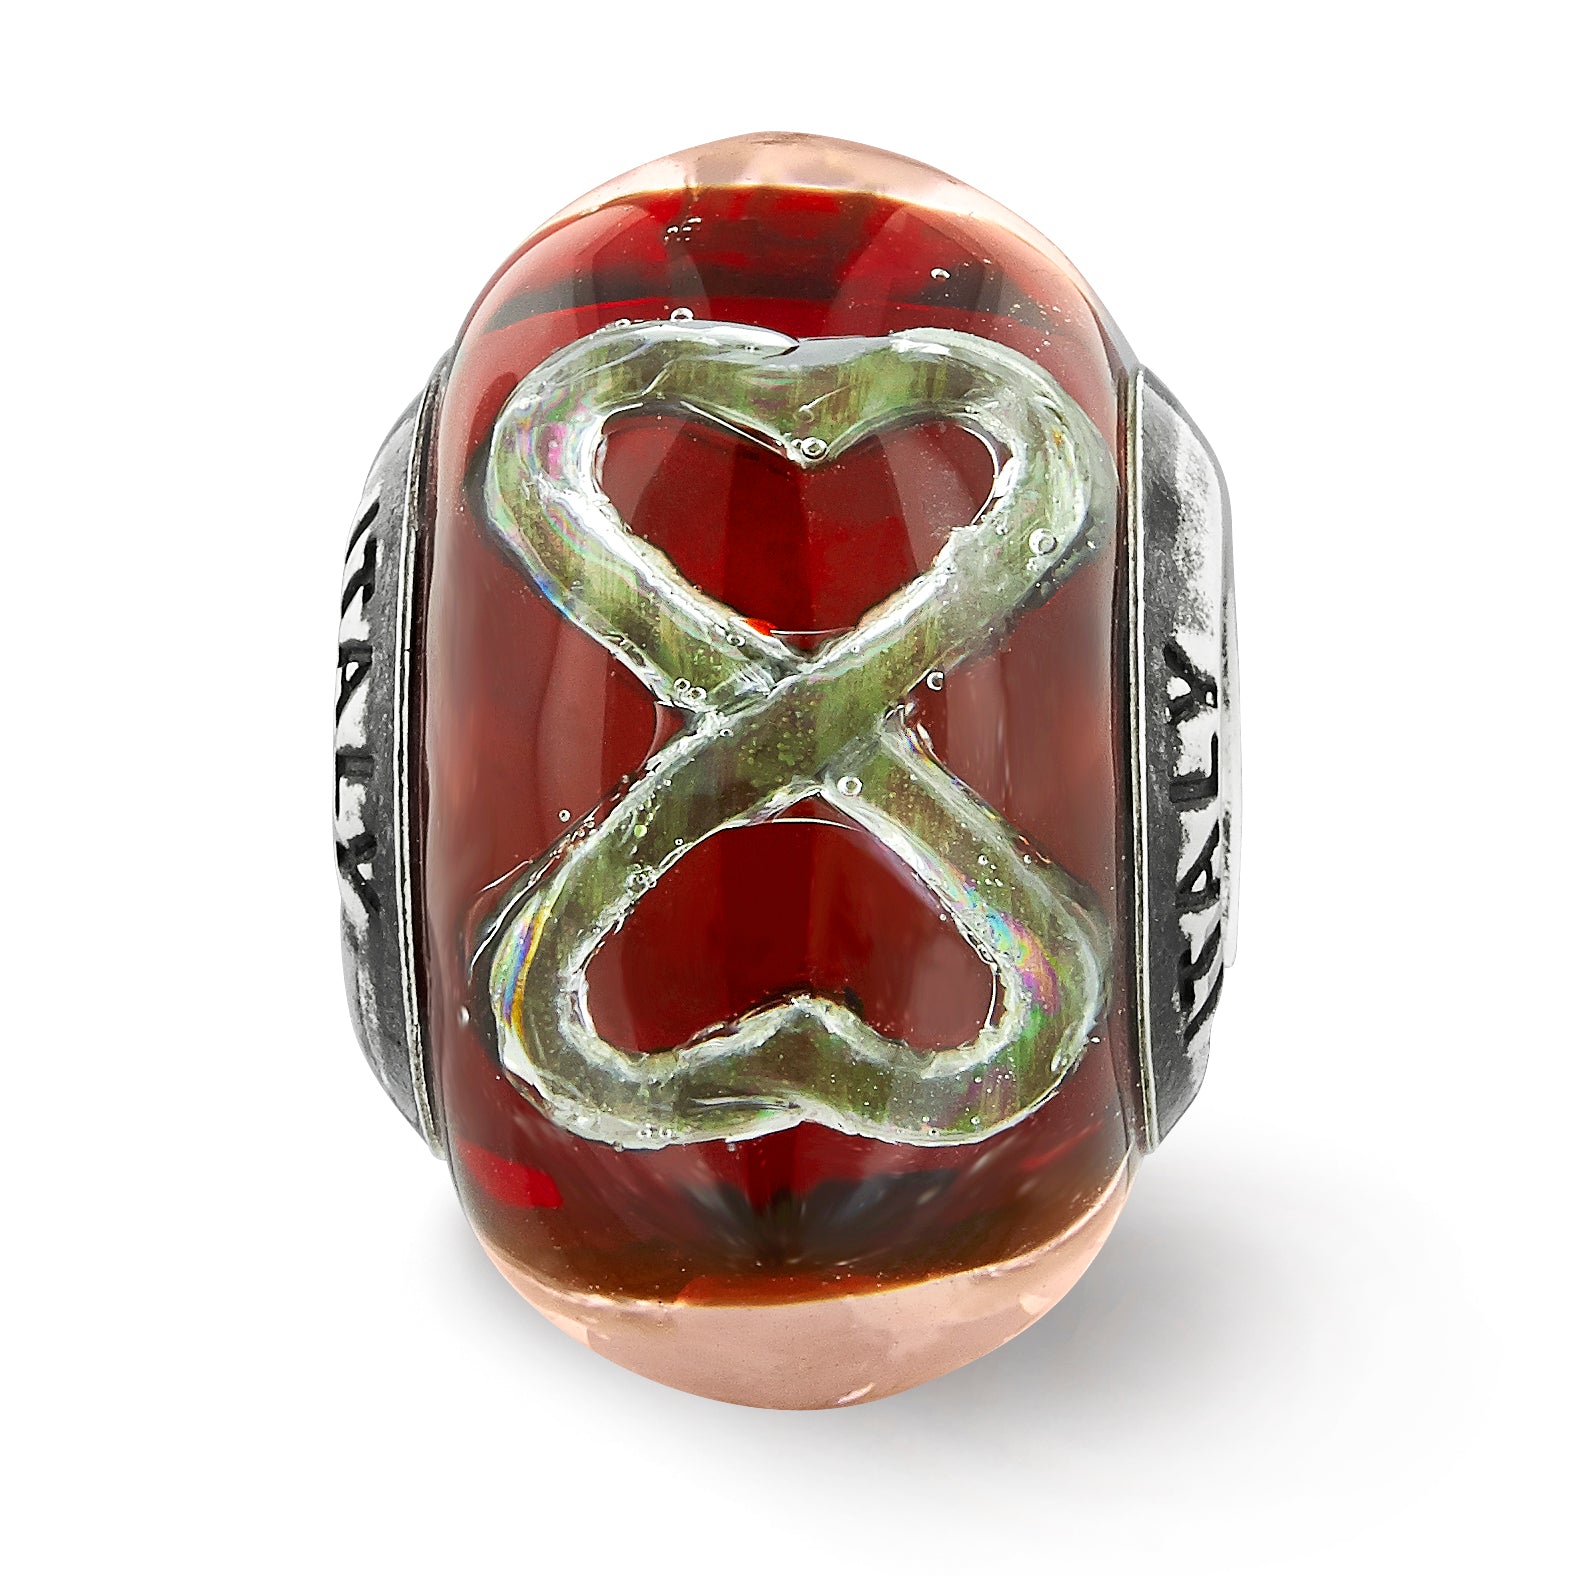 Sterling Silver Reflections Foil Heart Infinity Red Italian Glass Bead